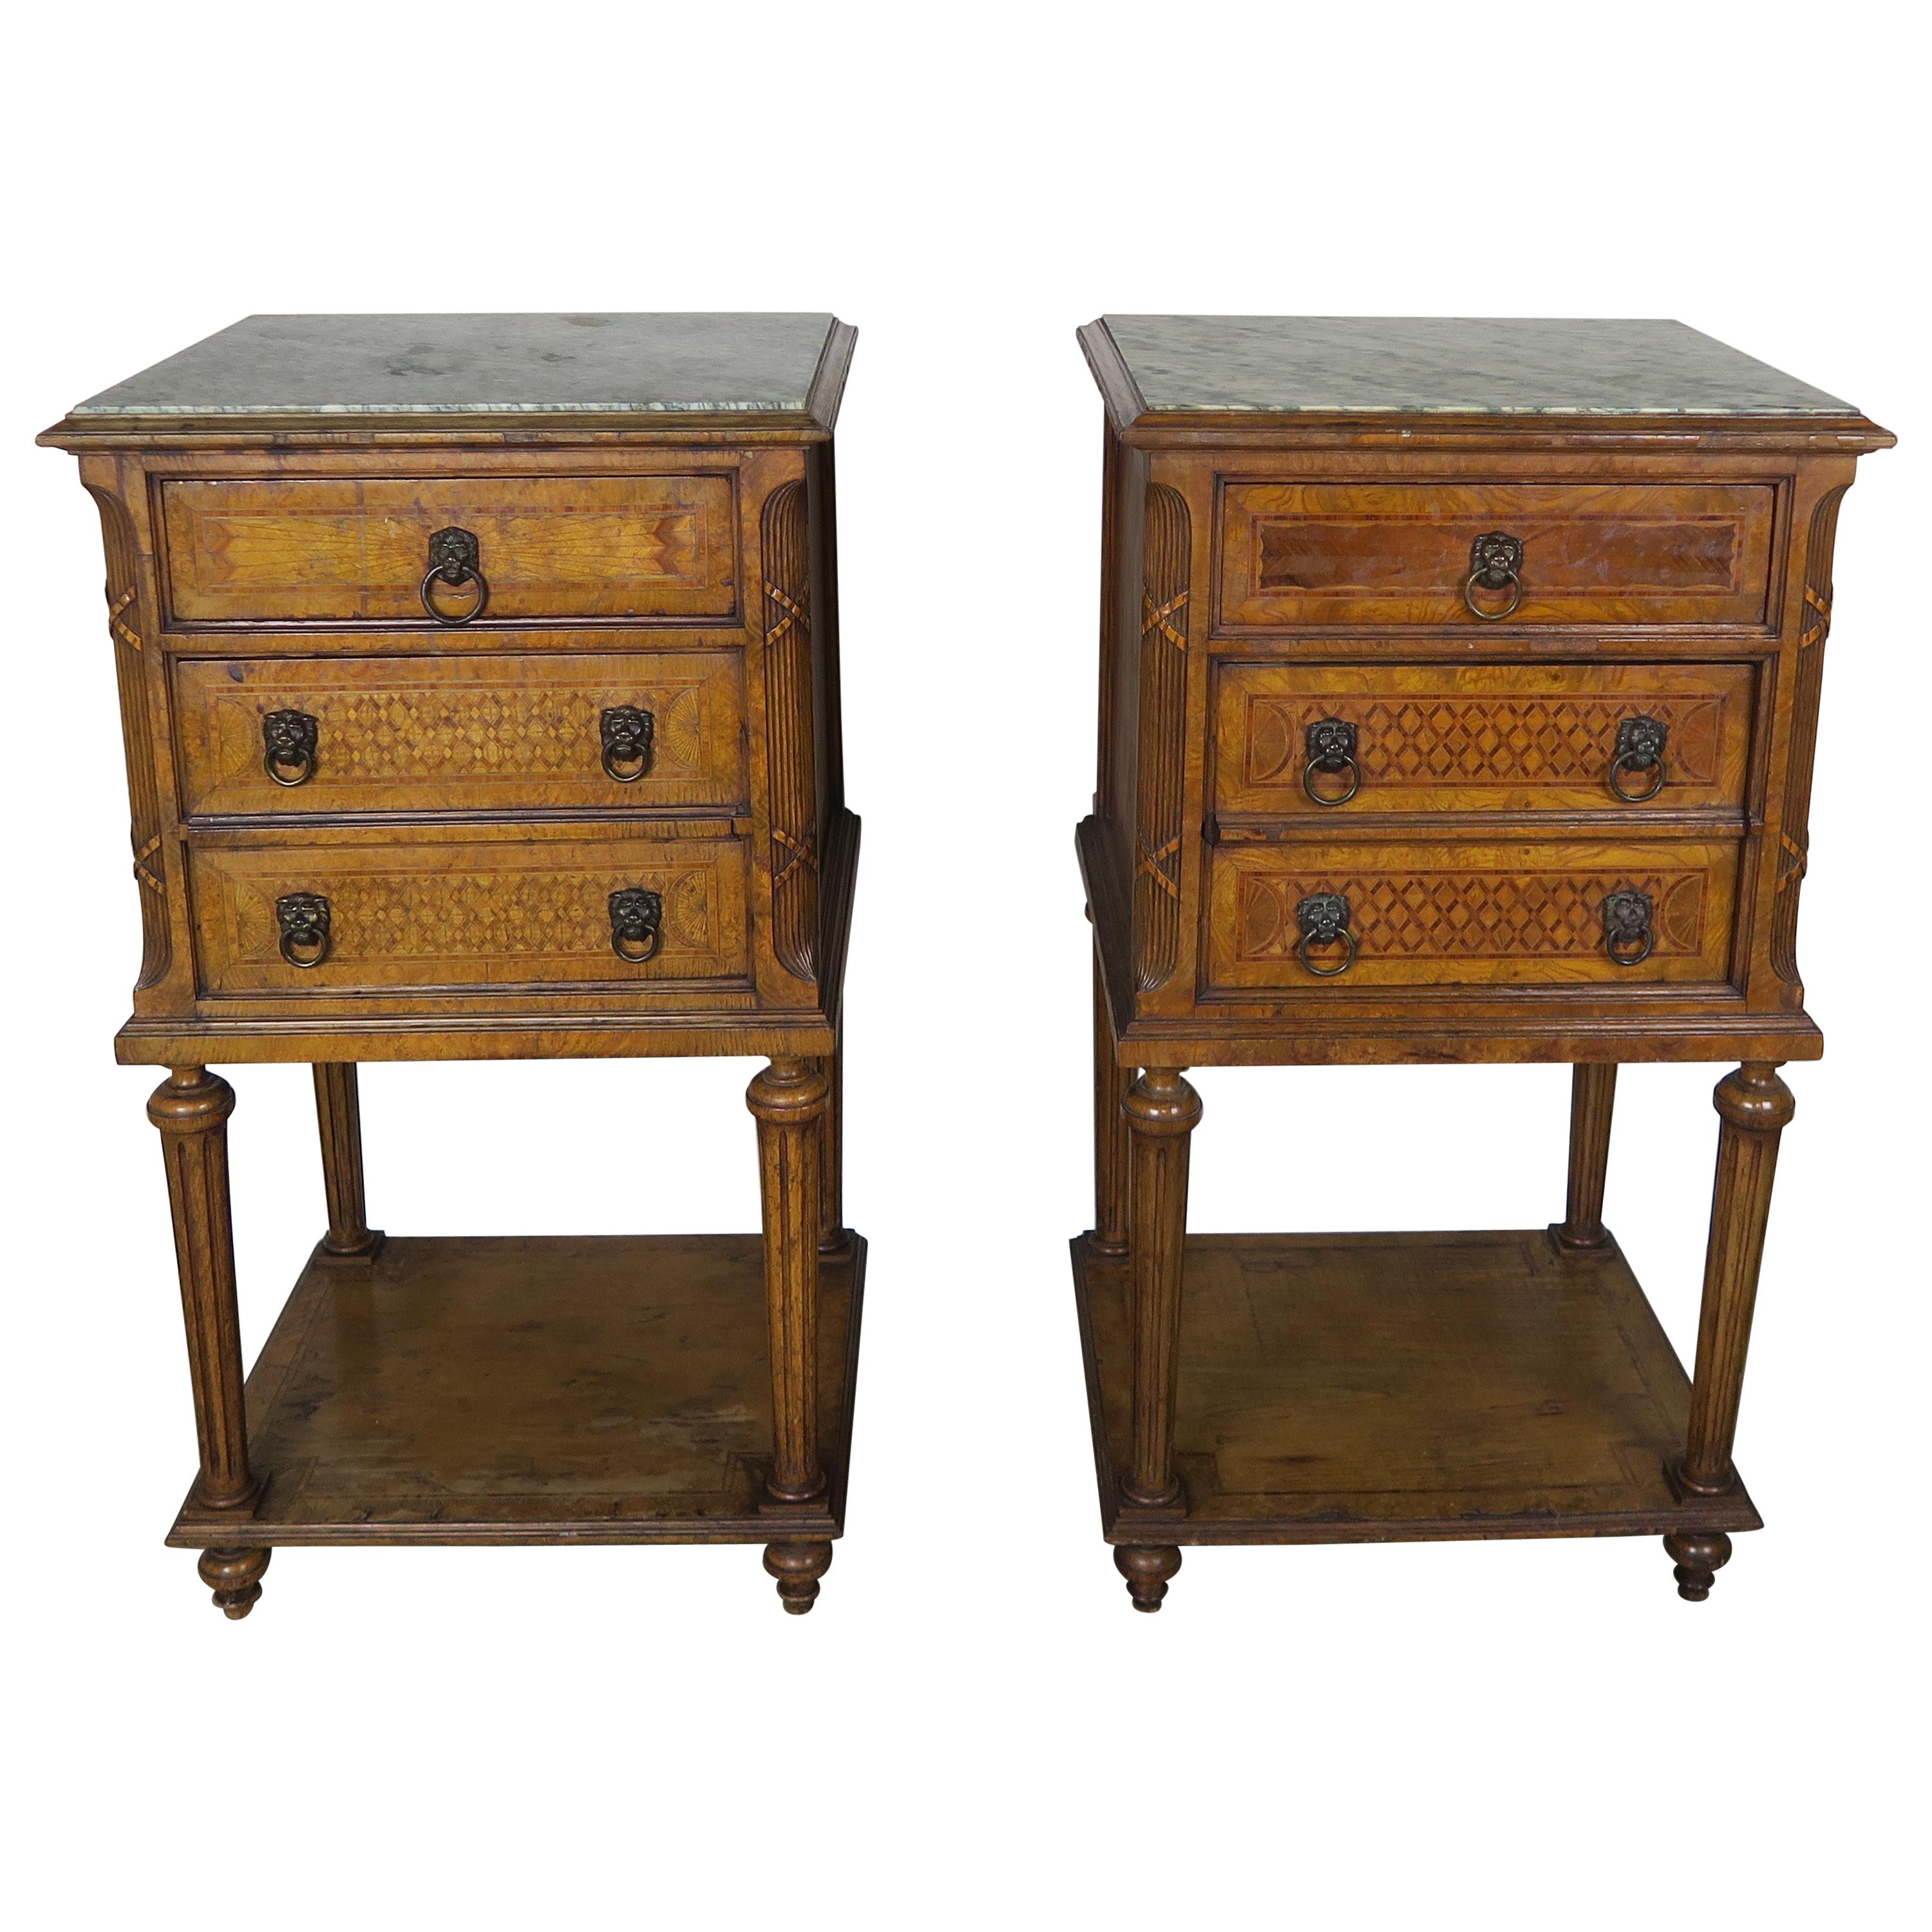 Pair of 19th Century Louis XVI Style Nightstands with Marble Tops